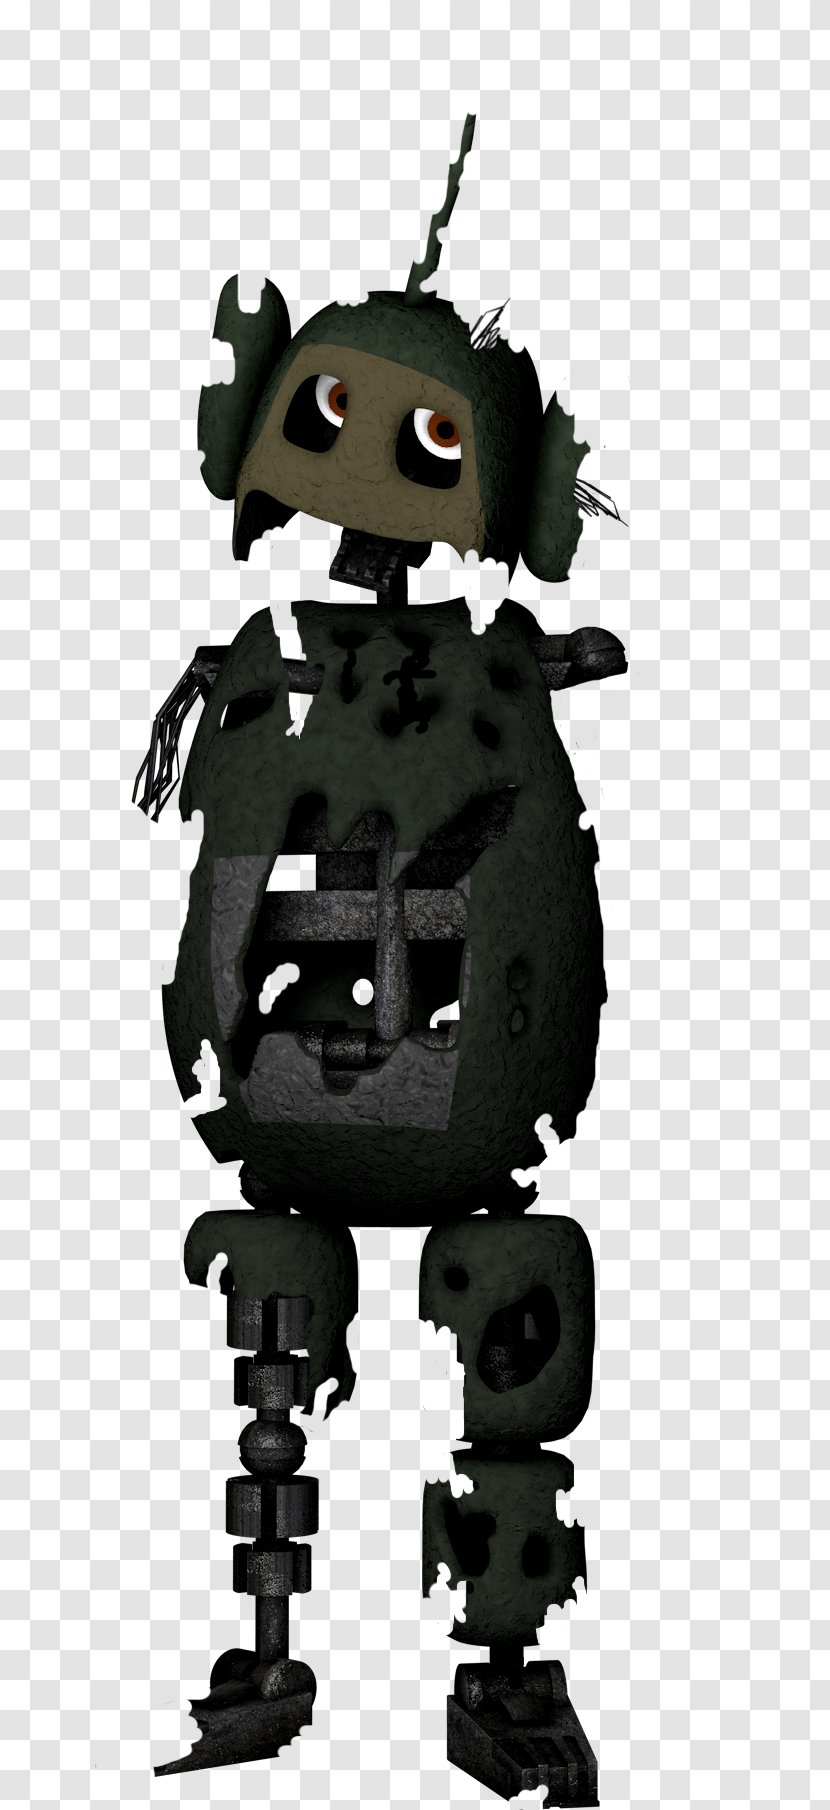 Five Nights At Freddy's 2 Freddy's: Sister Location 3 4 Tinky-Winky - Freddy S - Withered Leaf Transparent PNG